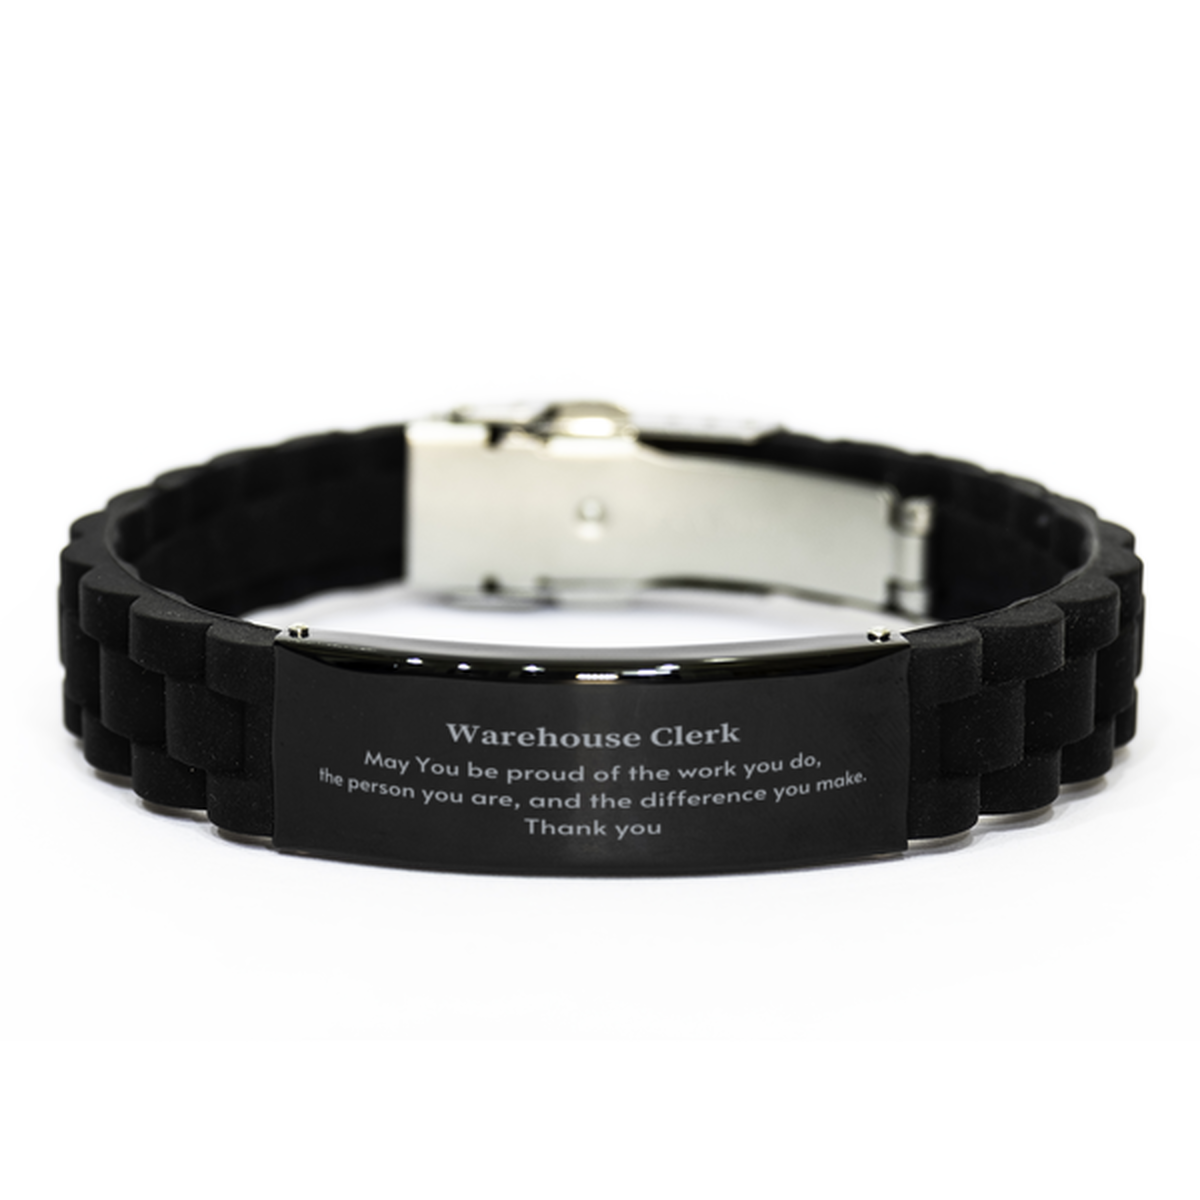 Heartwarming Black Glidelock Clasp Bracelet Retirement Coworkers Gifts for Warehouse Clerk, Warehouse Clerk May You be proud of the work you do, the person you are Gifts for Boss Men Women Friends